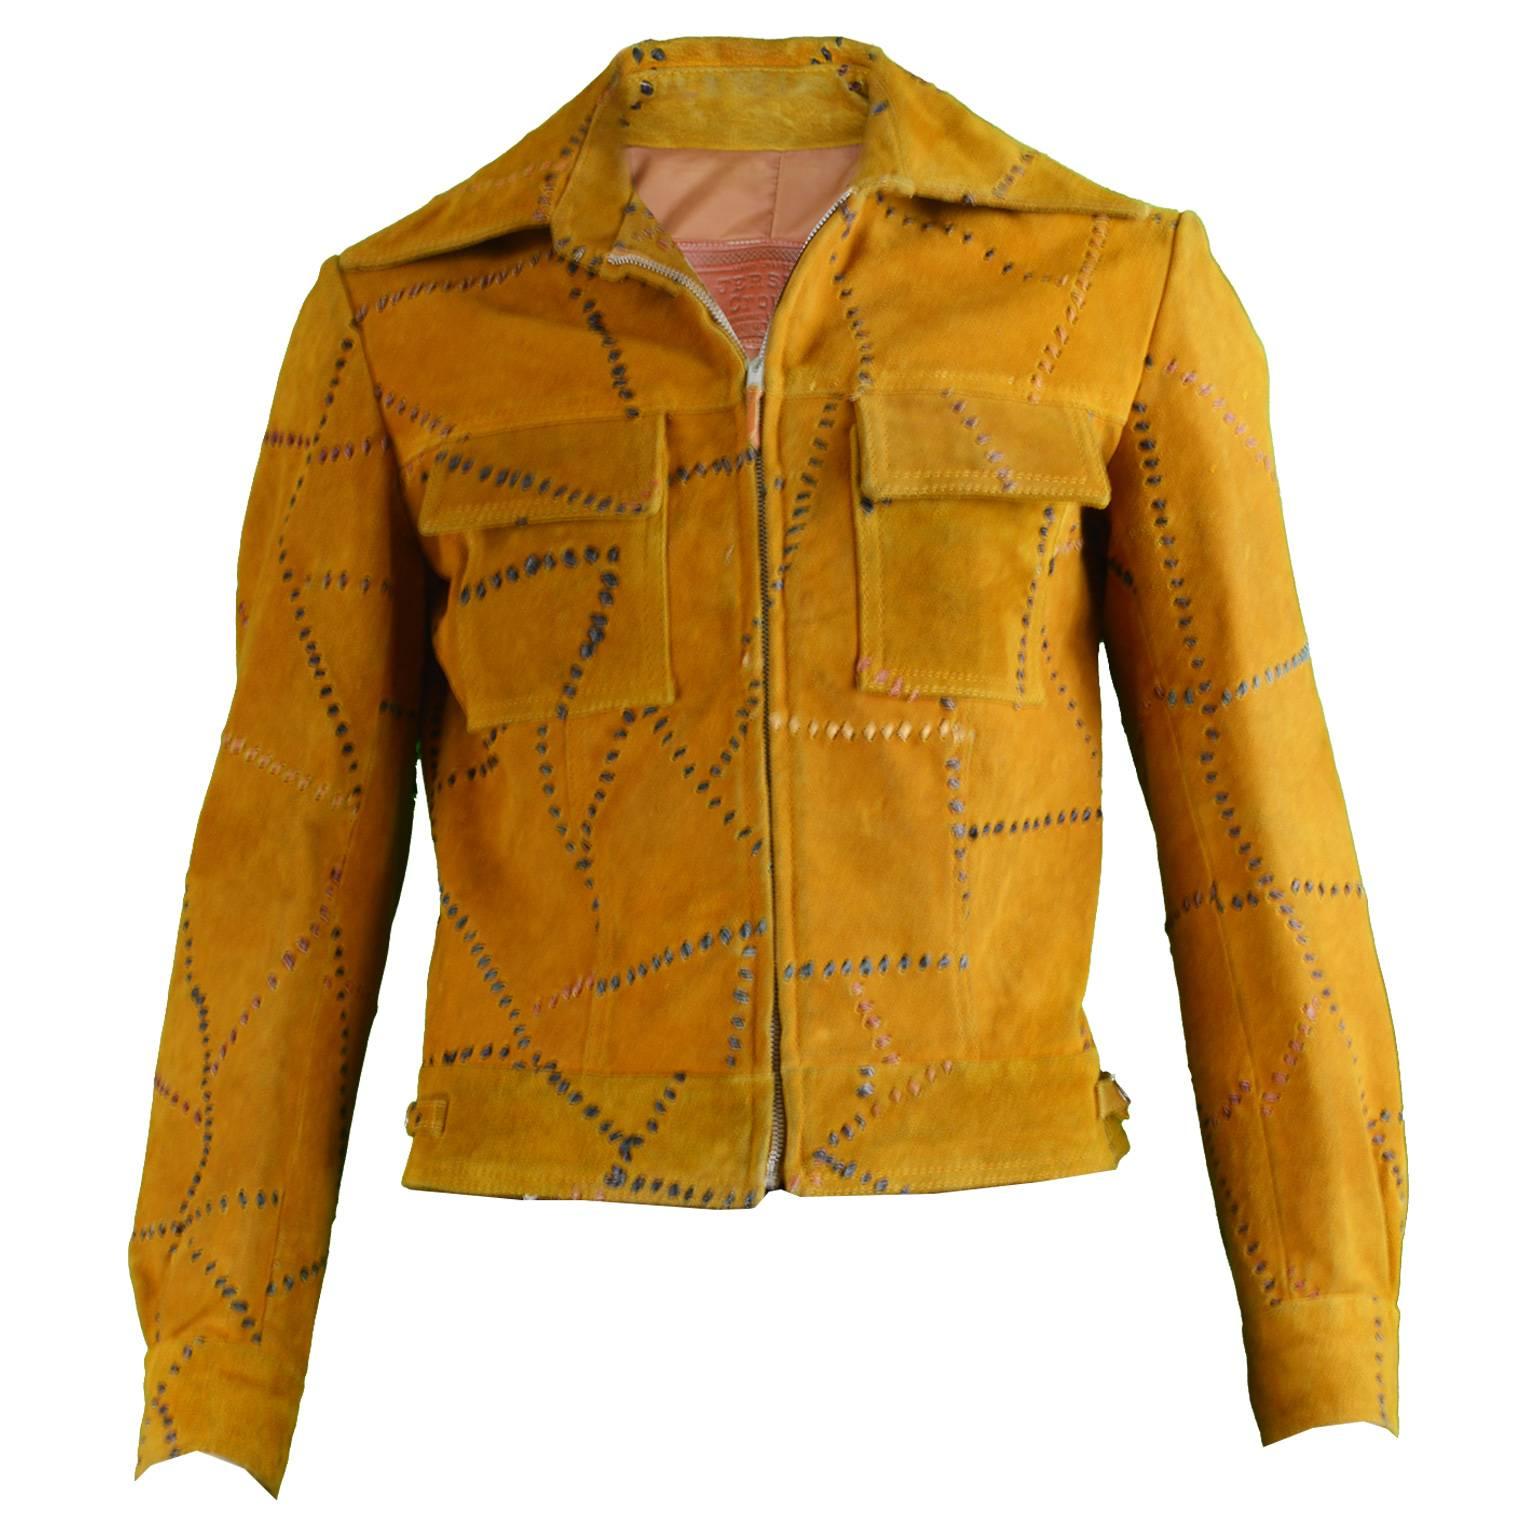 Vintage Men's Hand Crafted Tan Suede Whip Stitch Jacket, 1970s For Sale